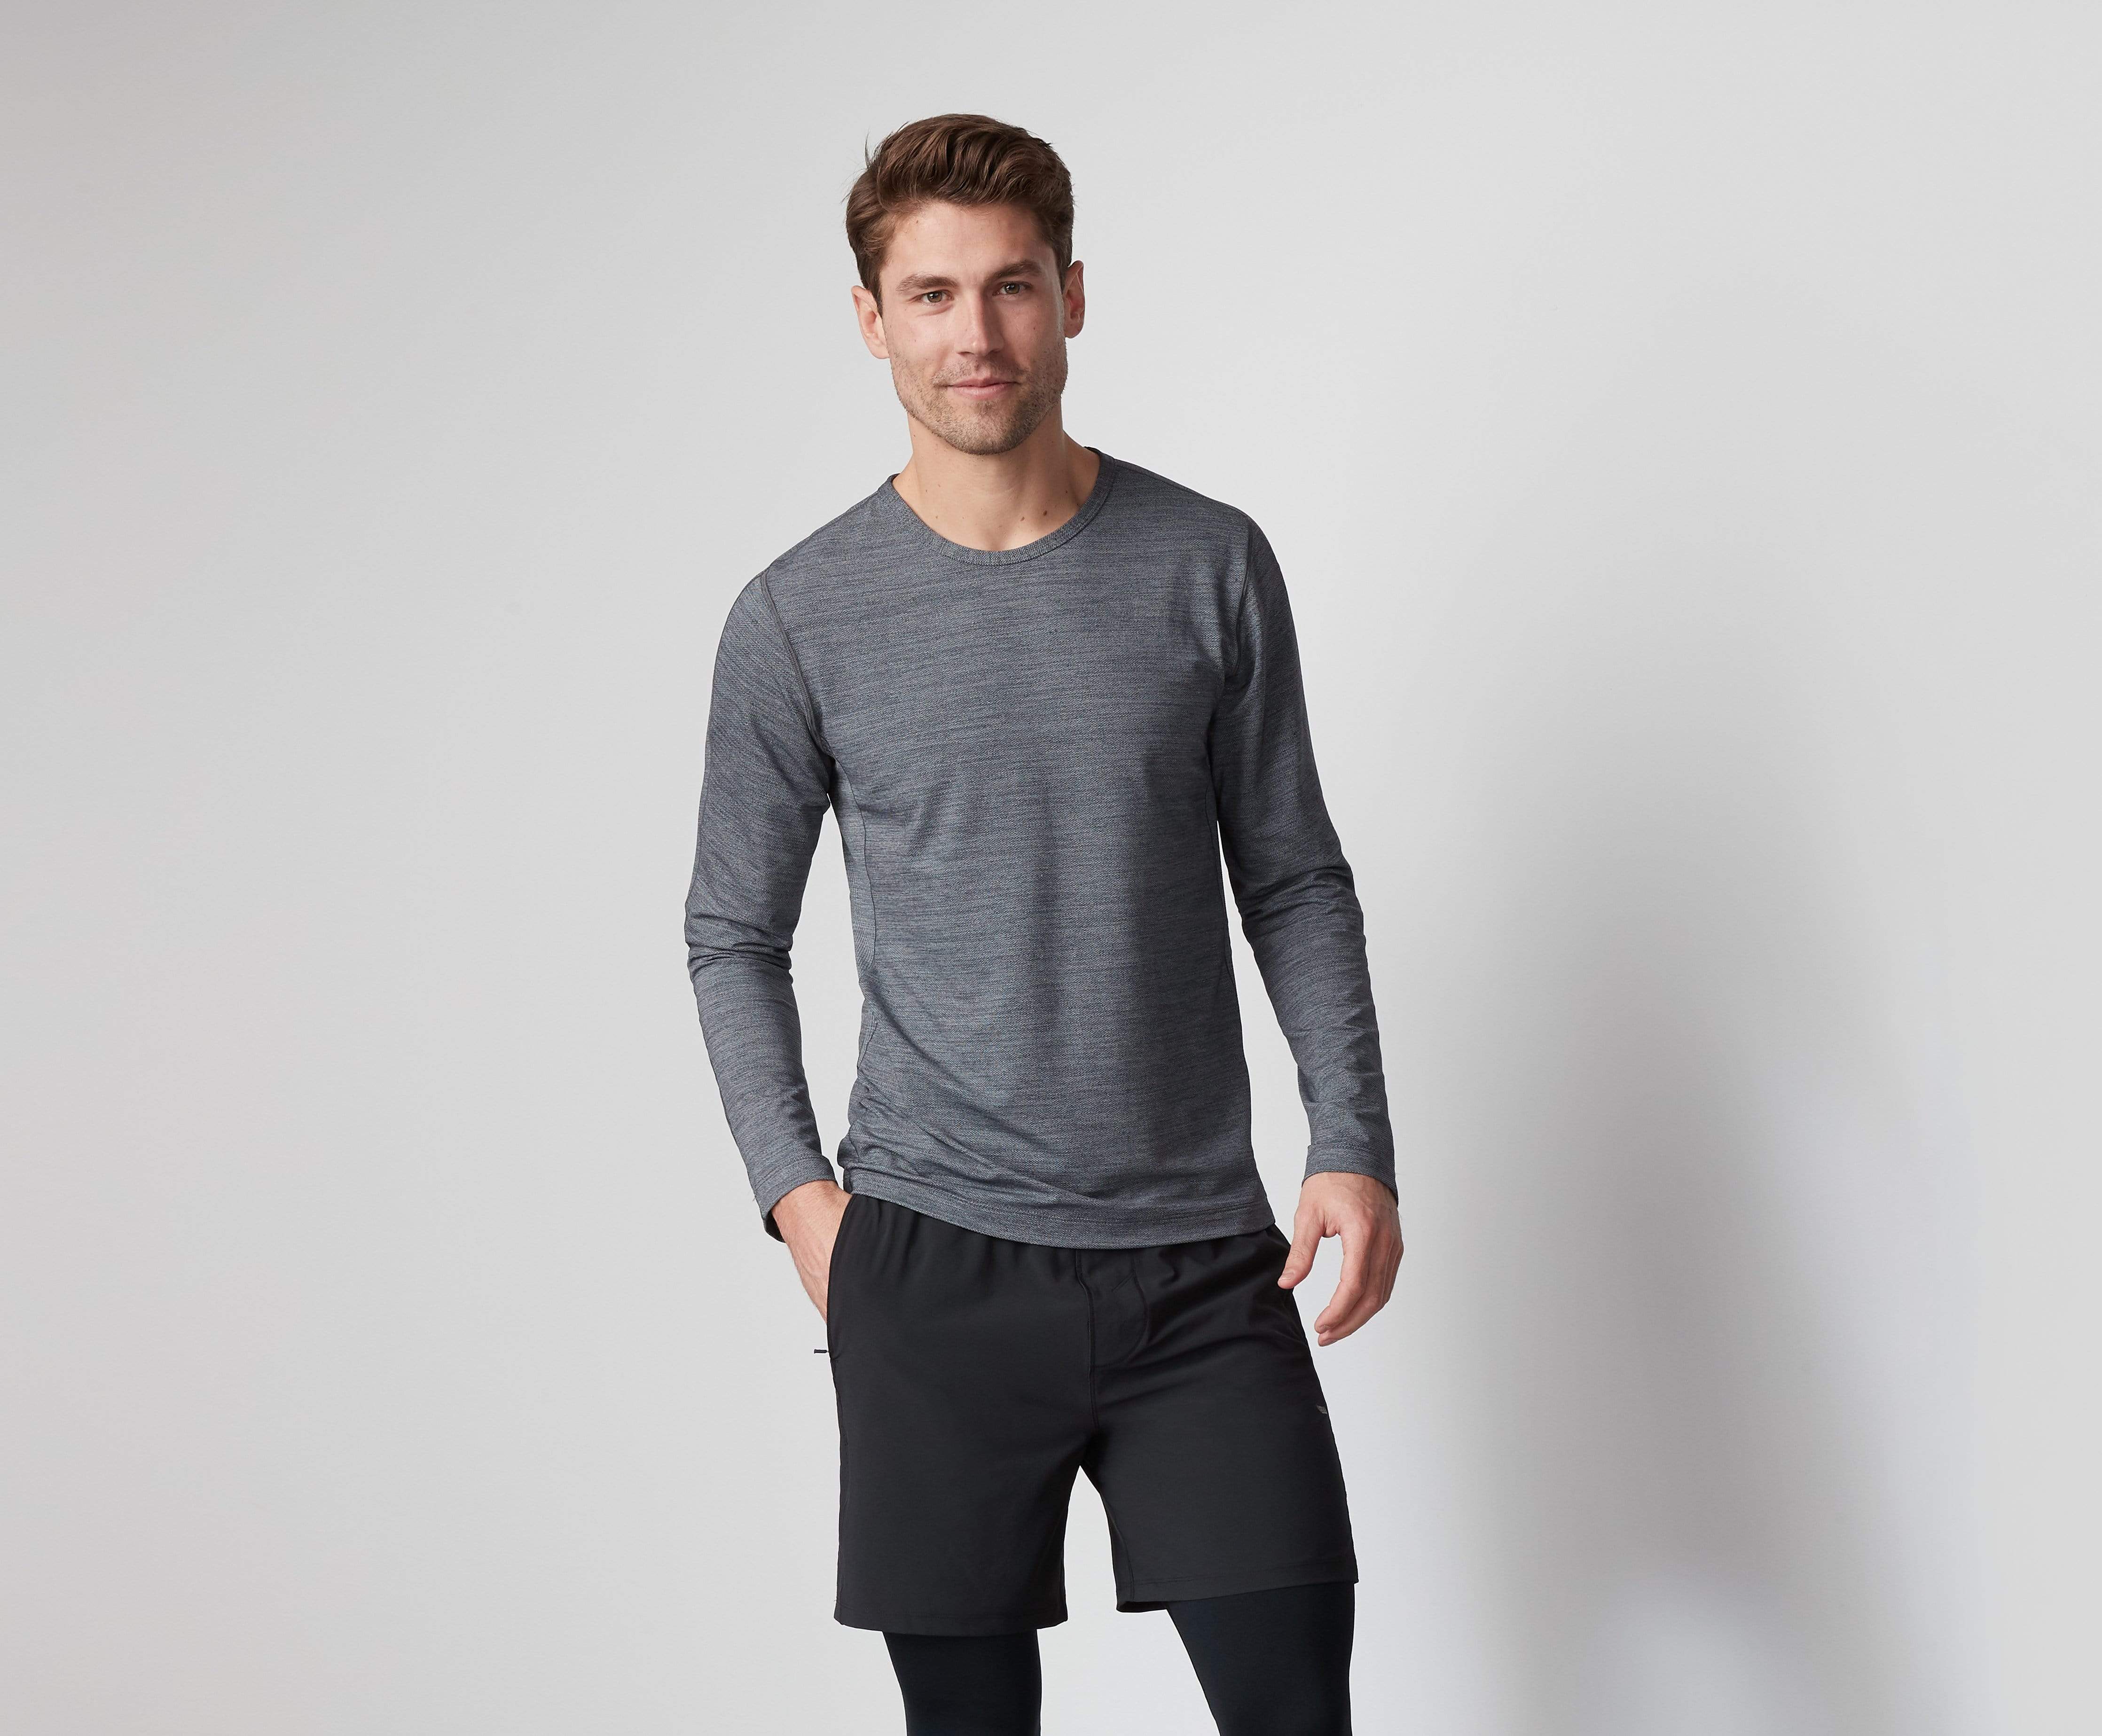 Mack Weldon launches Airknitx activewear collection for Equinox